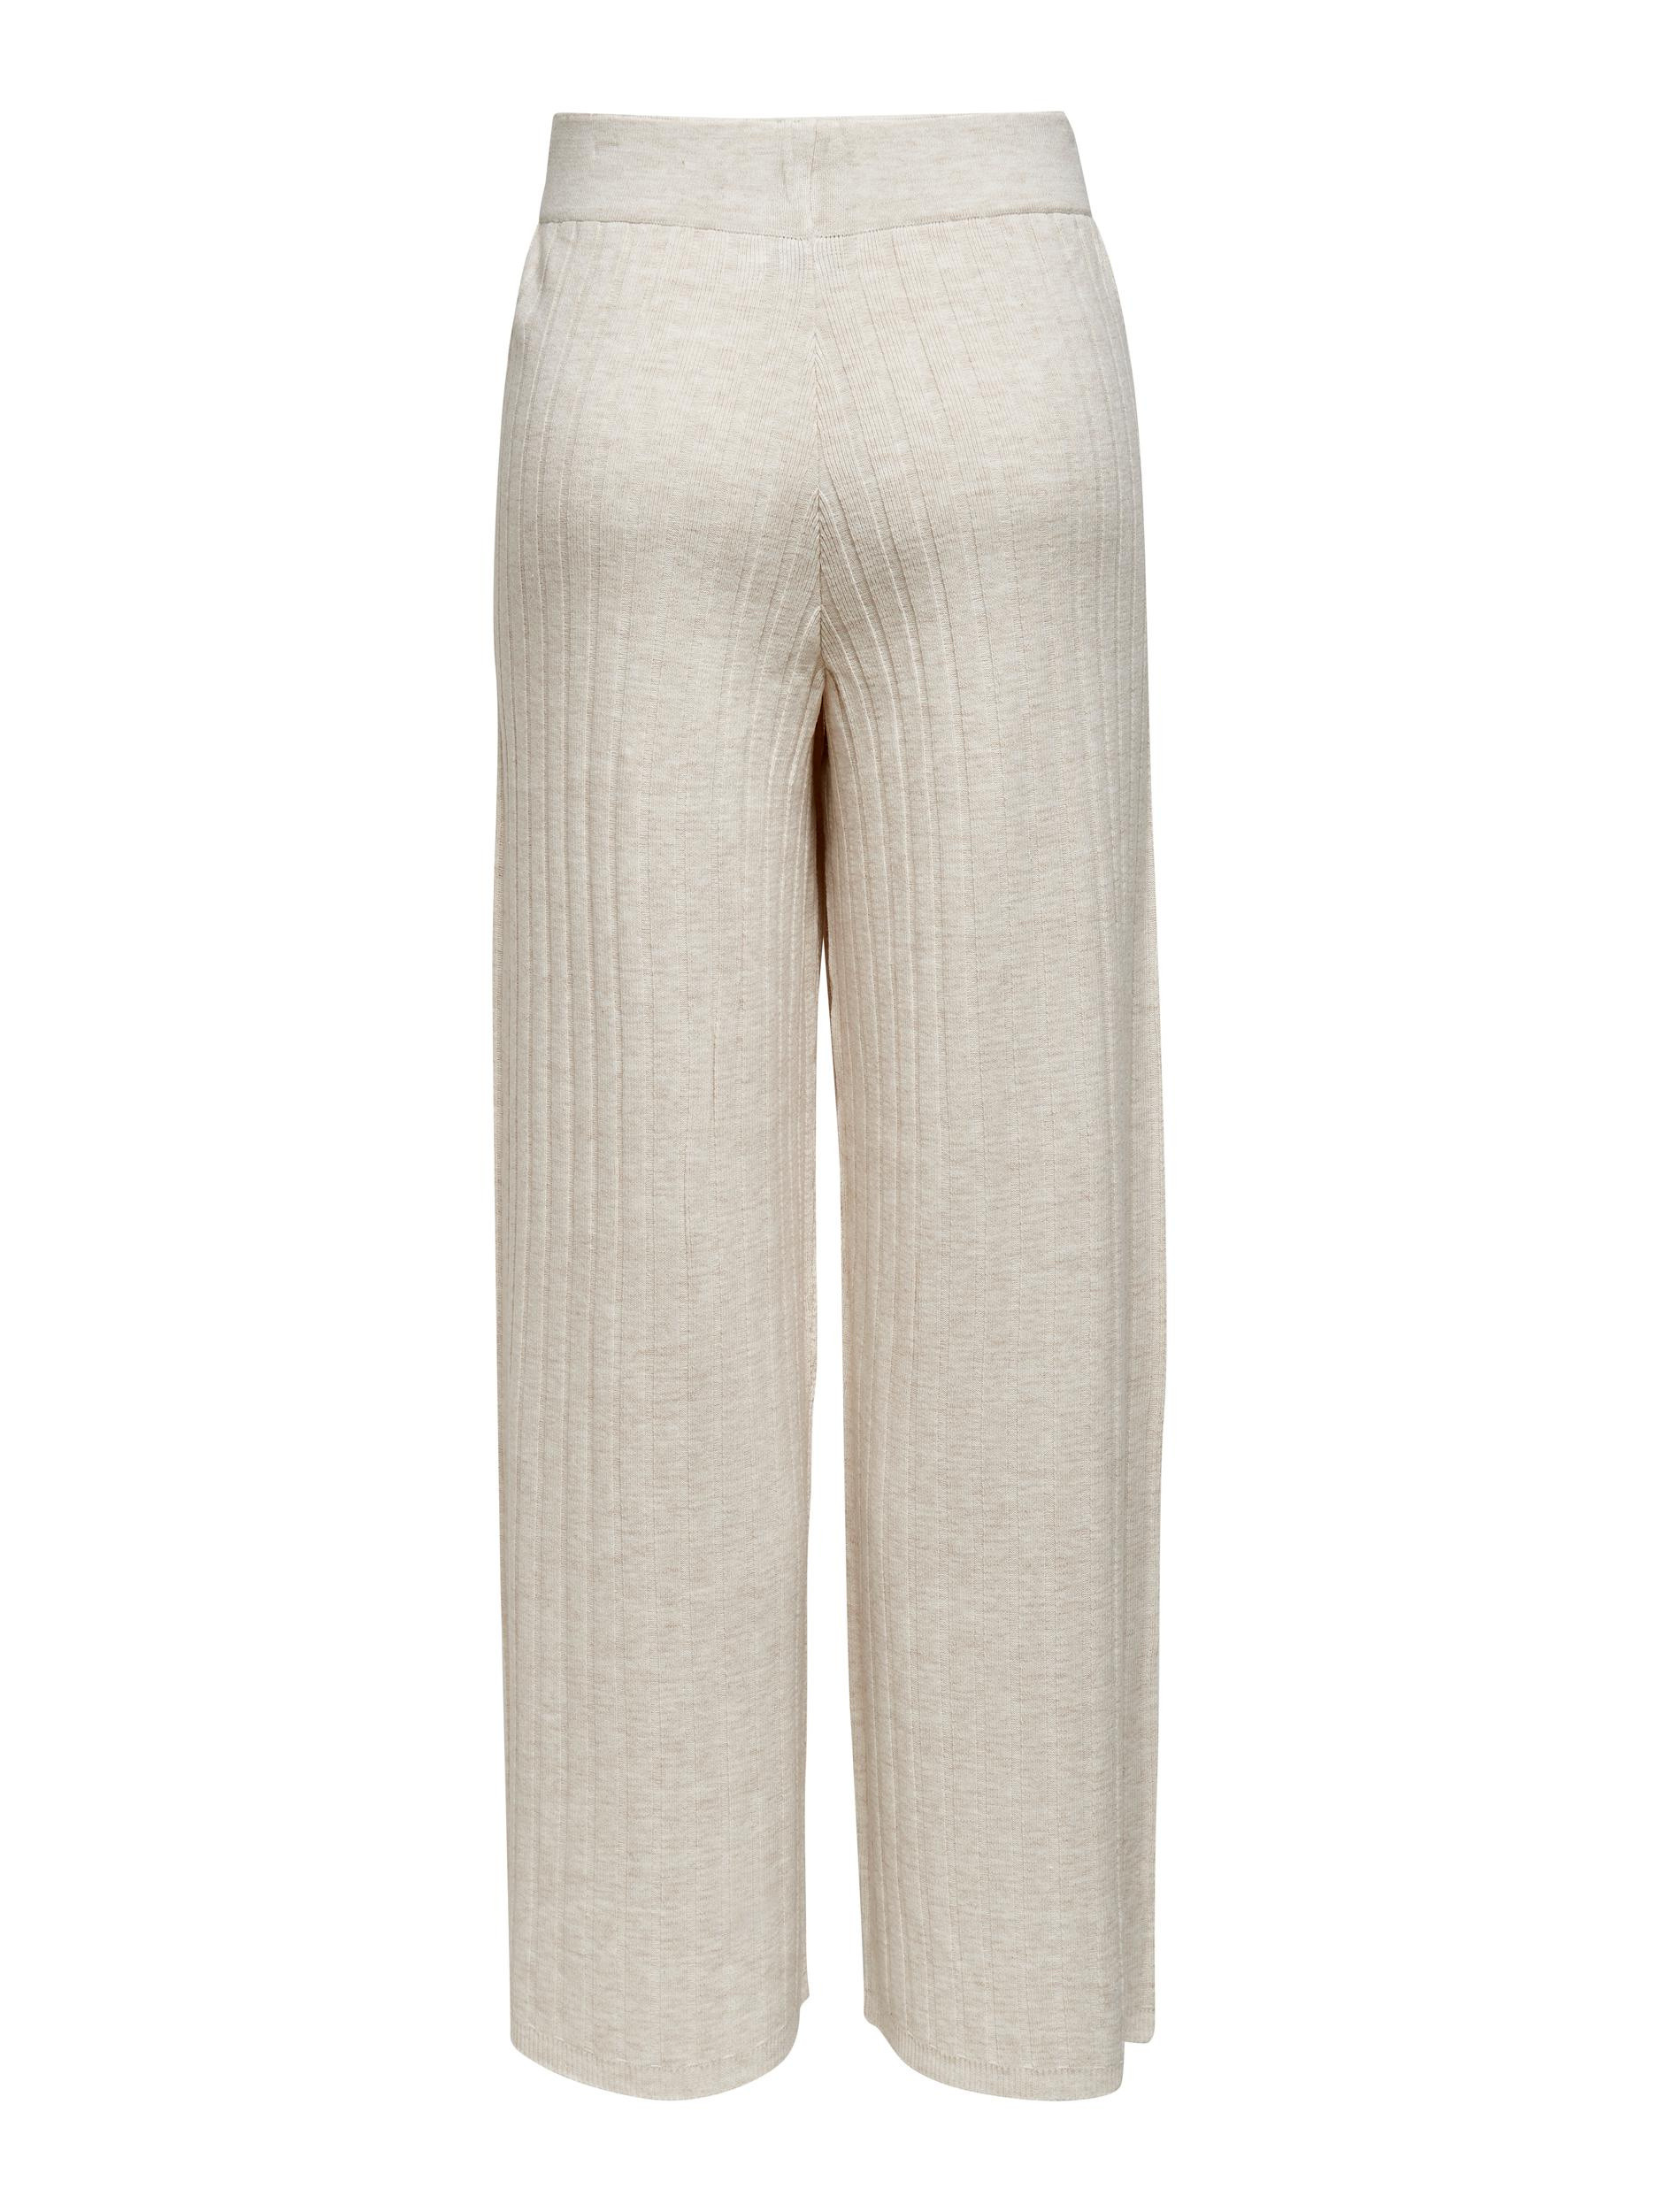 high-waisted trousers, White, large image number 1